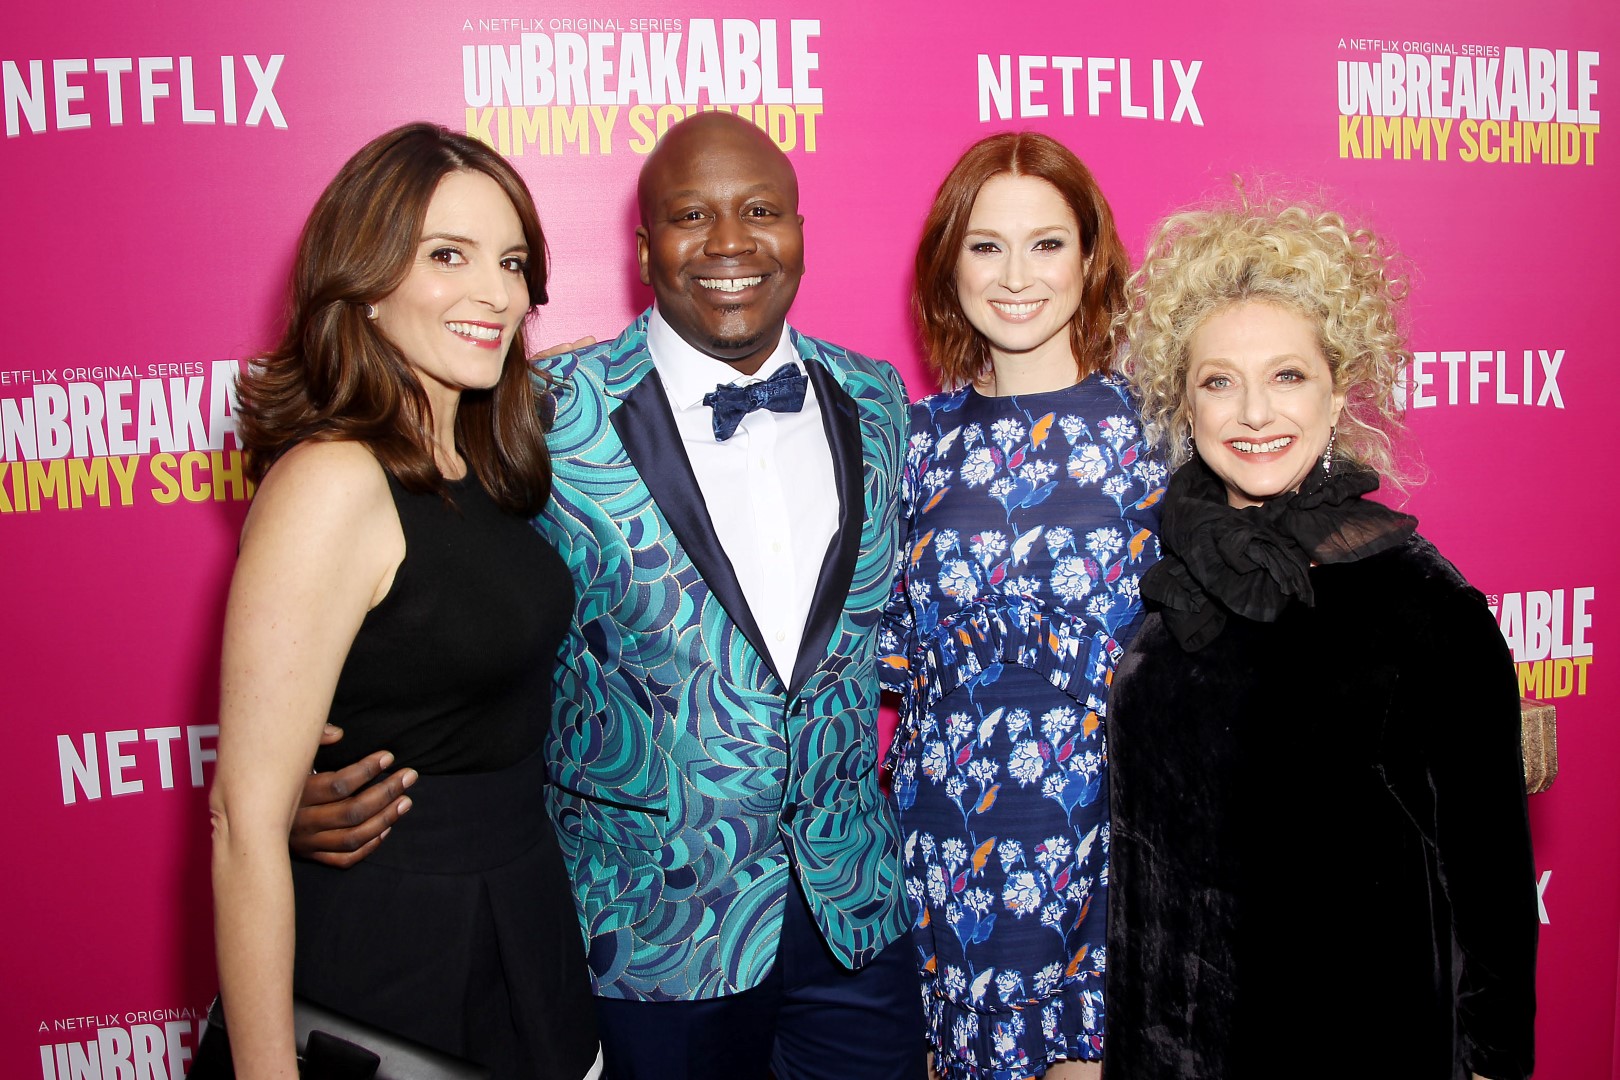 Unbreakable Kimmy Schmidt seconda stagione premiere: il red carpet a New York